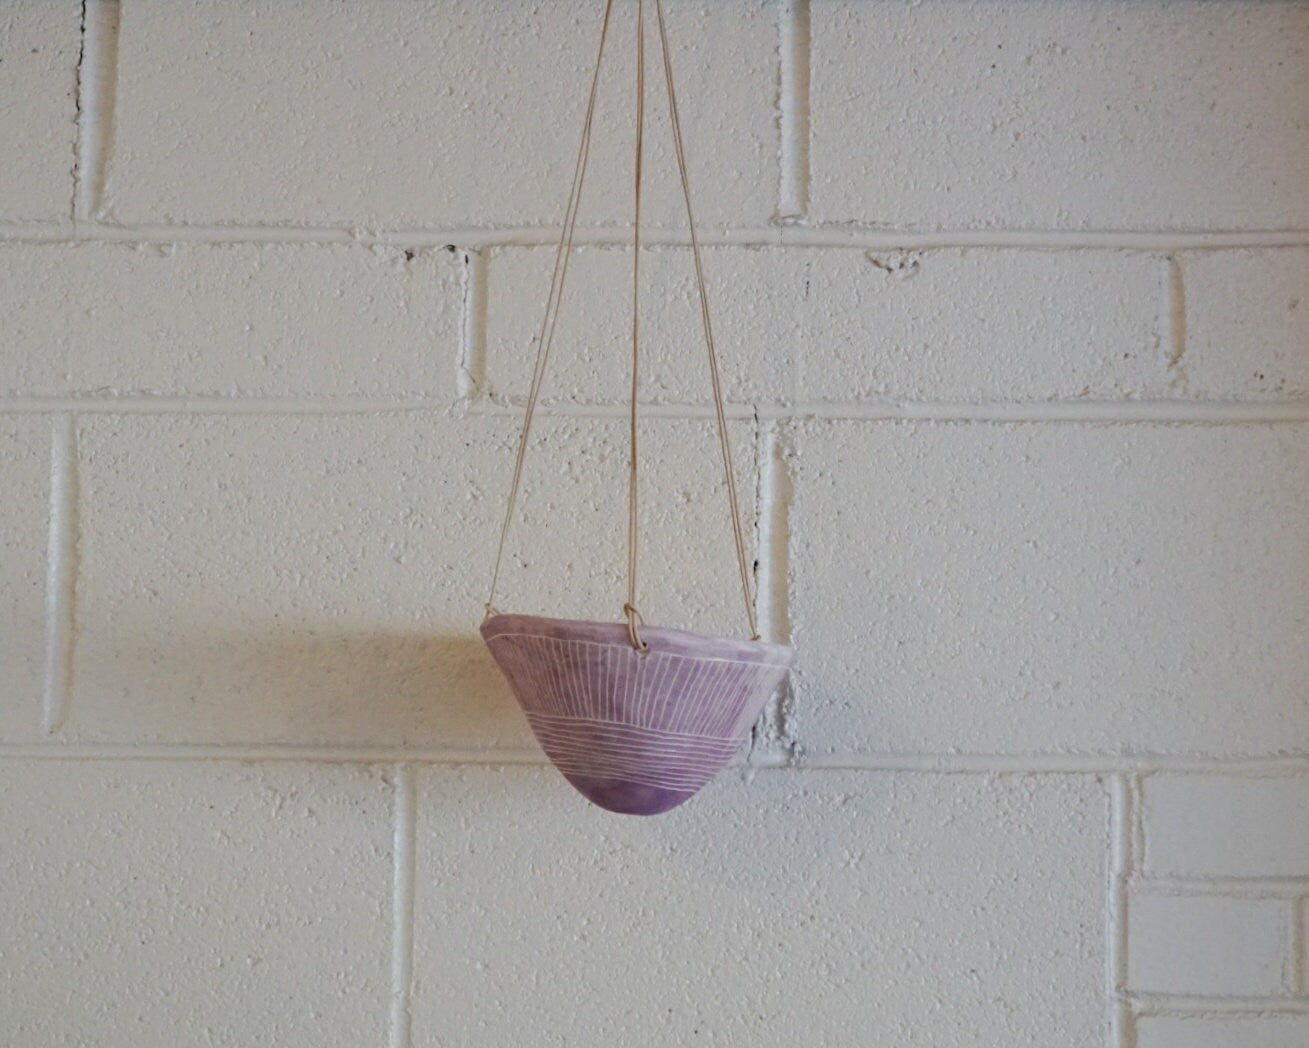 Purple & White Hanging Planter w/ "Directional Line" Design - Glazed - Hanging Pot with Carvings - Succulent, Cactus, Herb, Air Plant, Etc